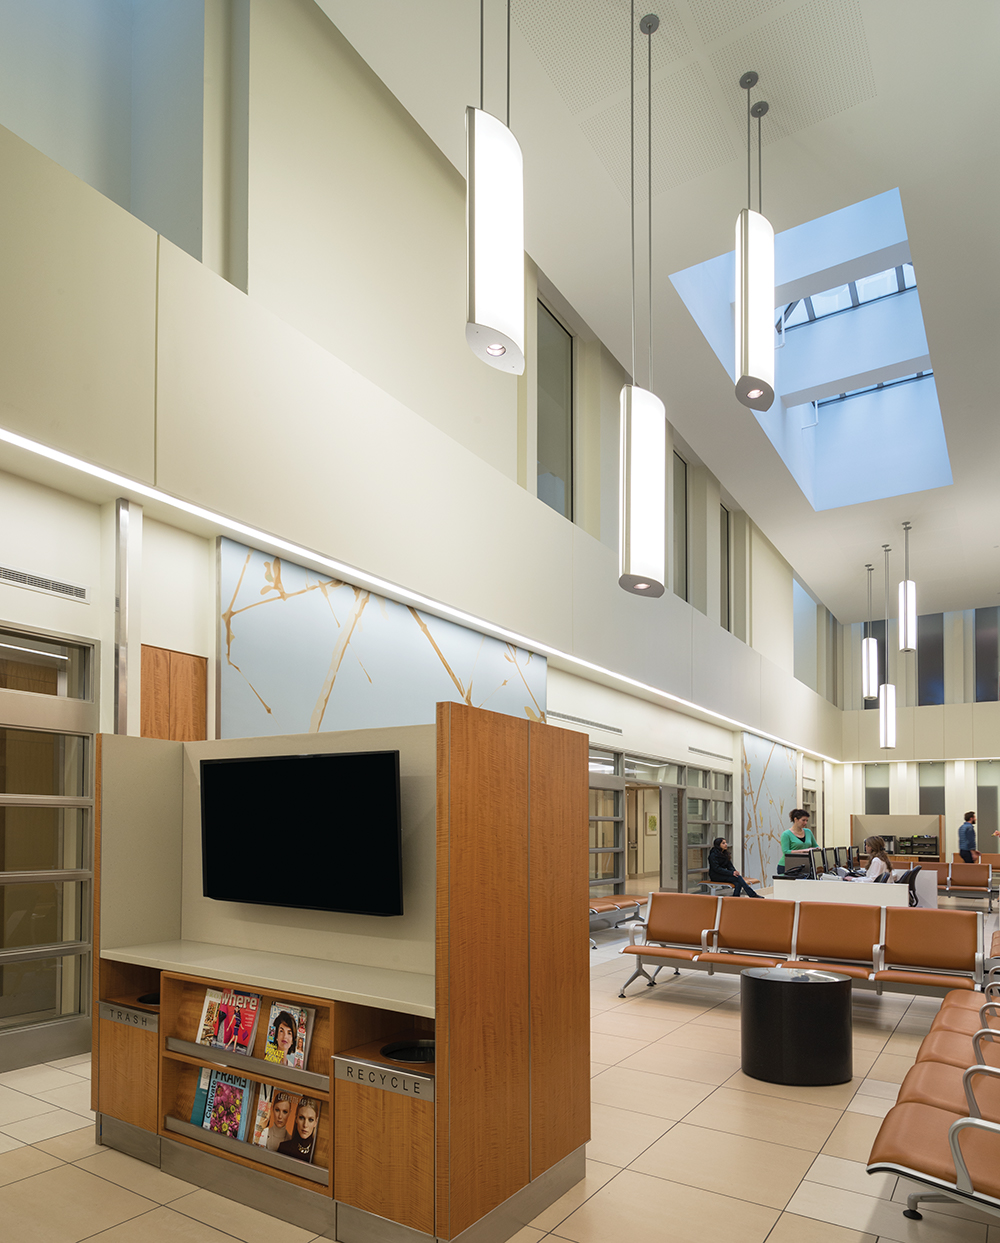 Air Foil pendants hung in a large waiting room for eye-catching hospital lighting design.